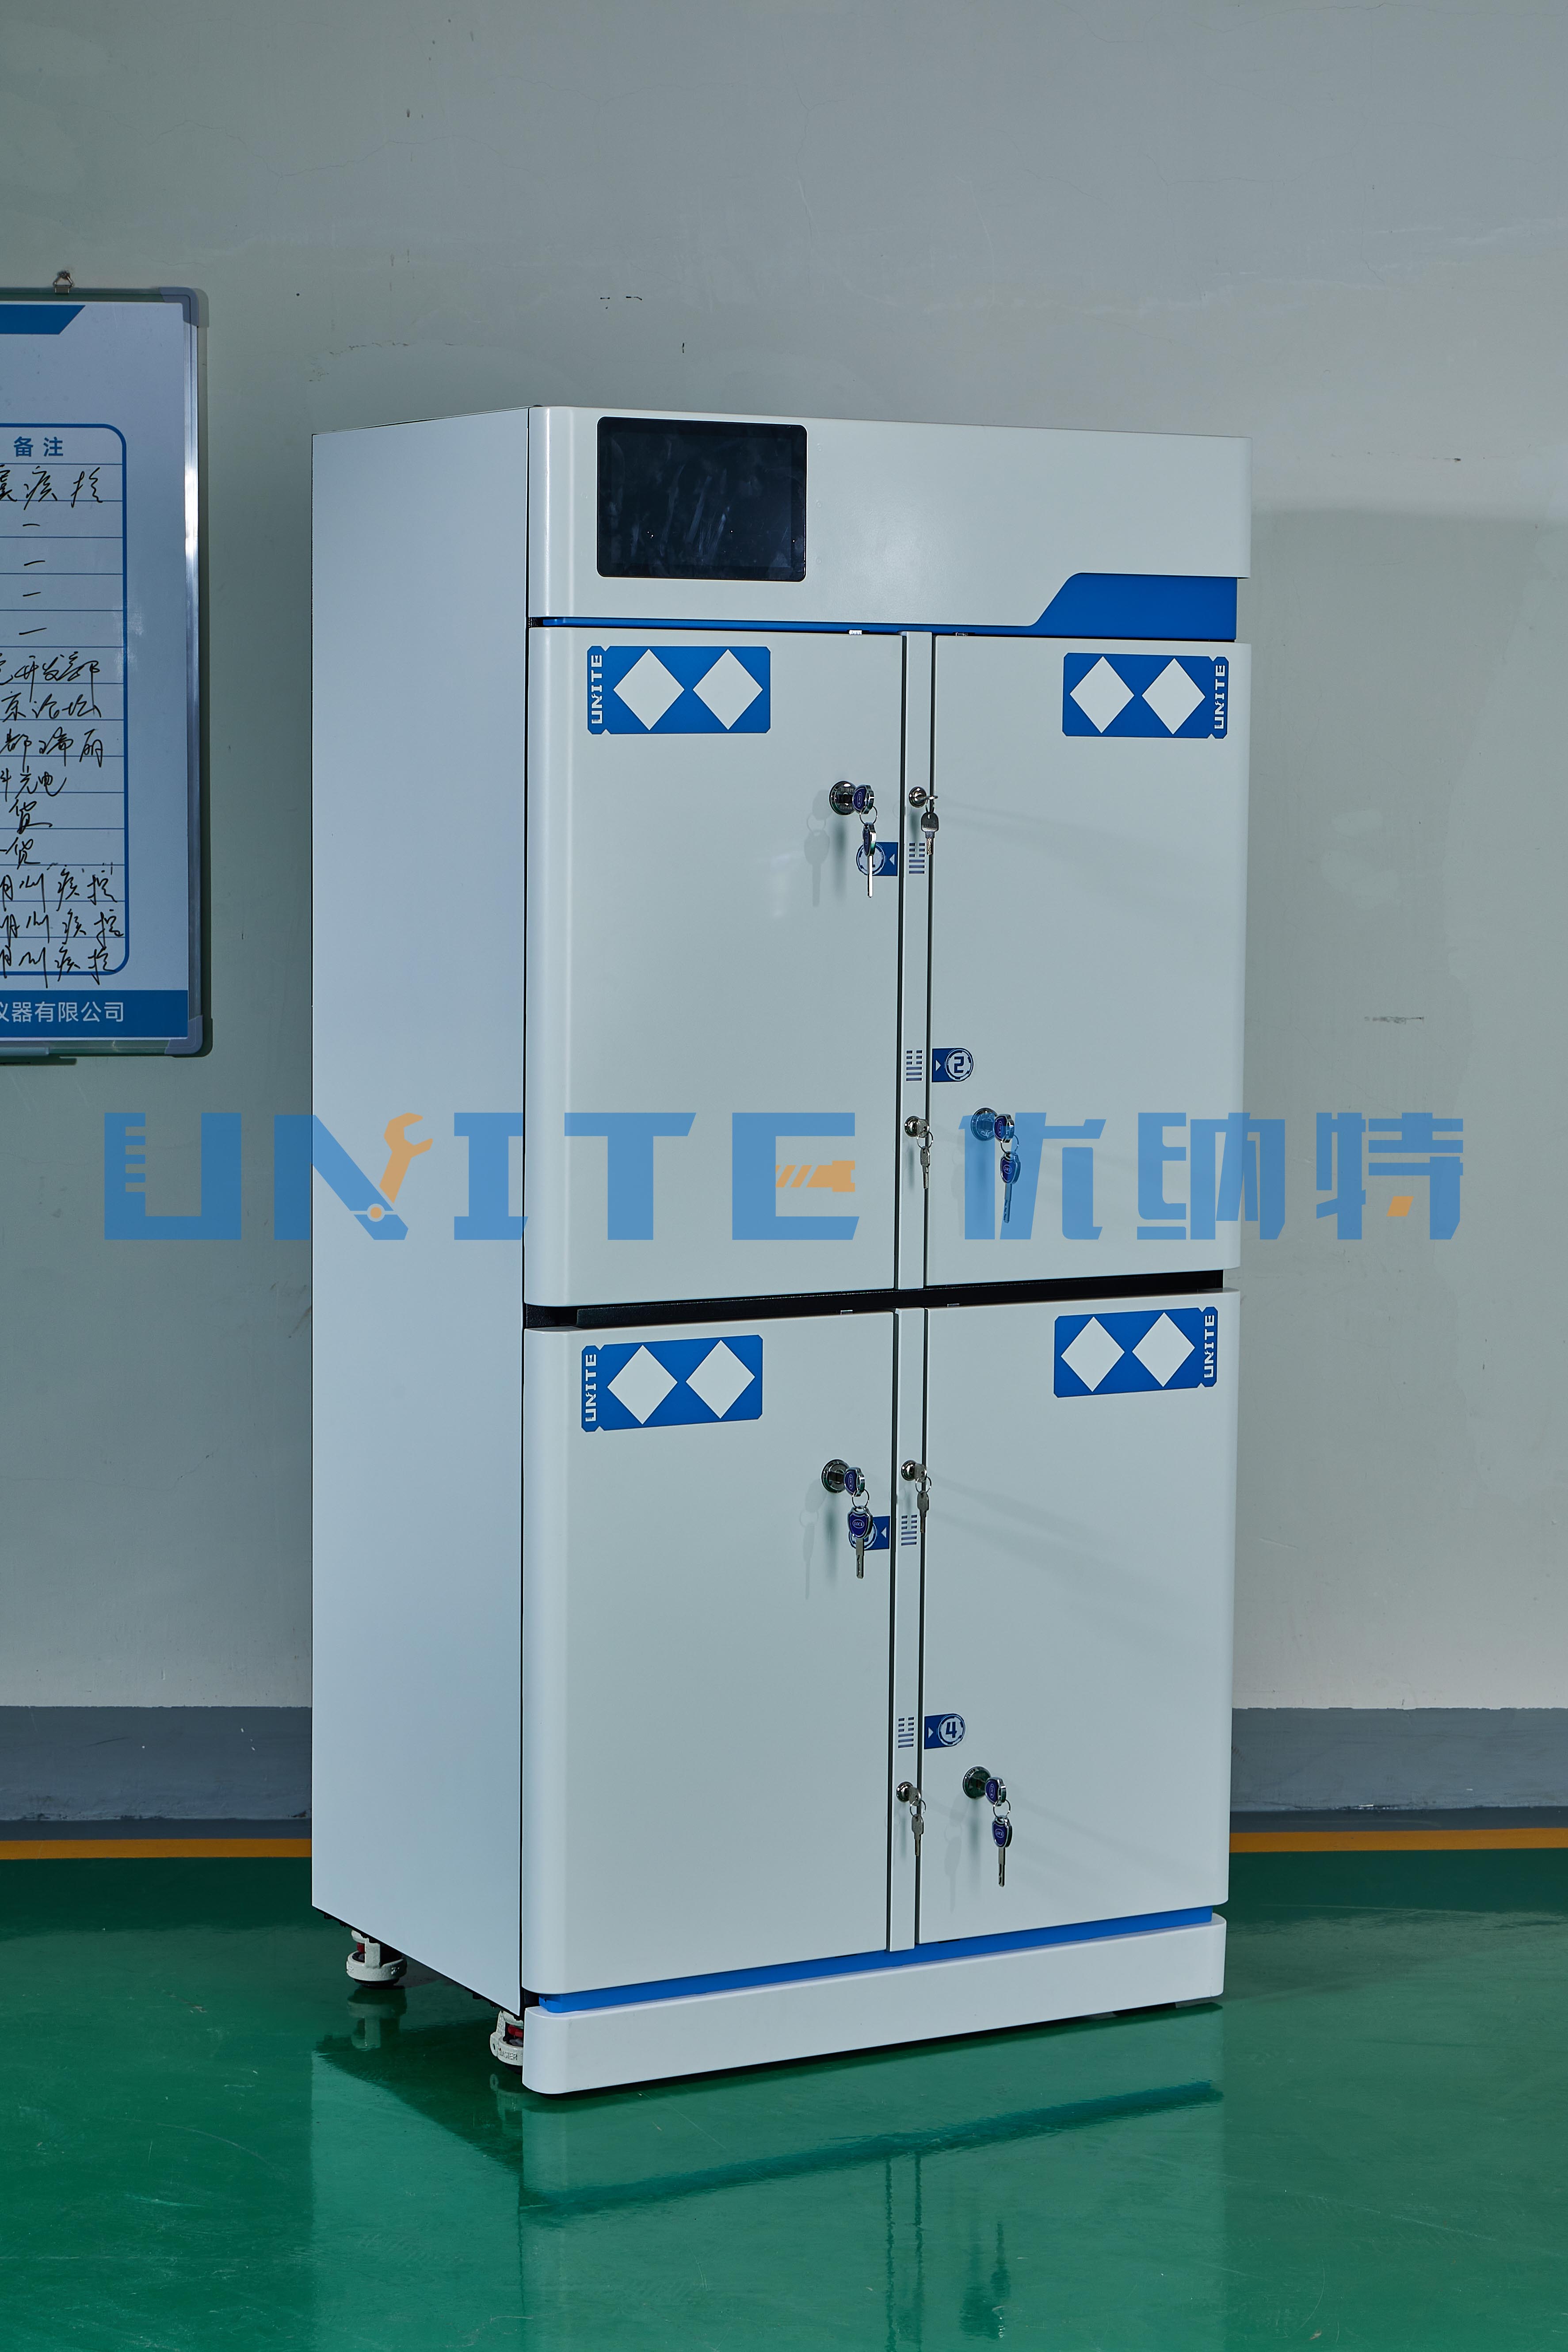 Unite Usample R4.2 Four-zone Matrix IOT Cabinets for Hazardous Chemicals with Partition Storage of 160+ Reagent Bottle